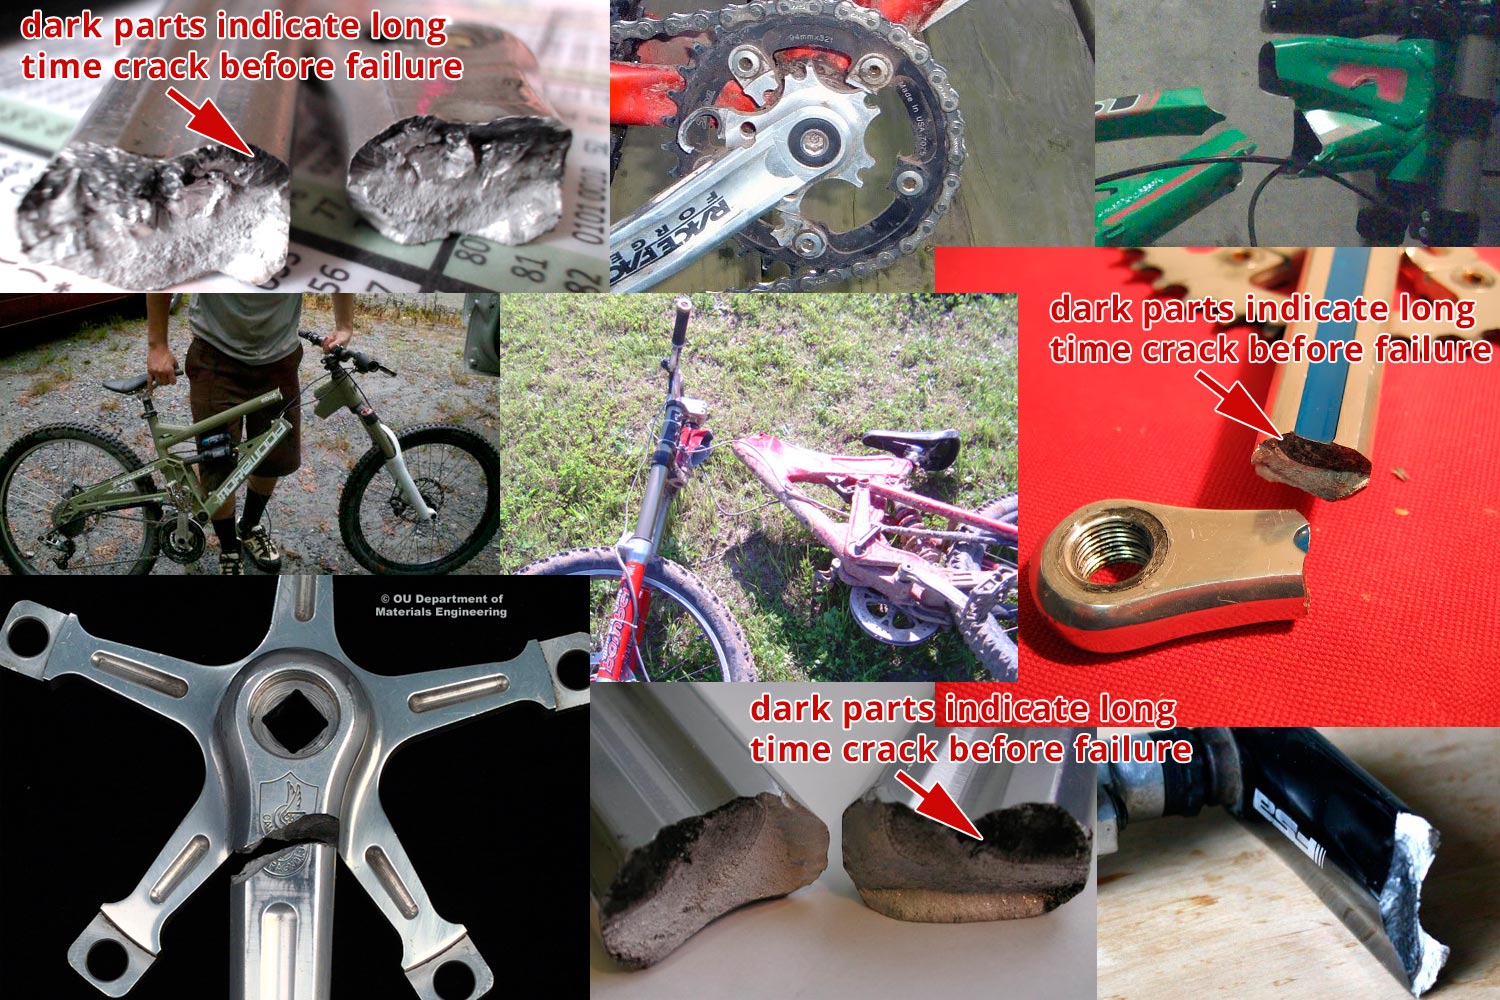 broken bicycle parts due to micro-cracks and cyclic loading causing fatigue